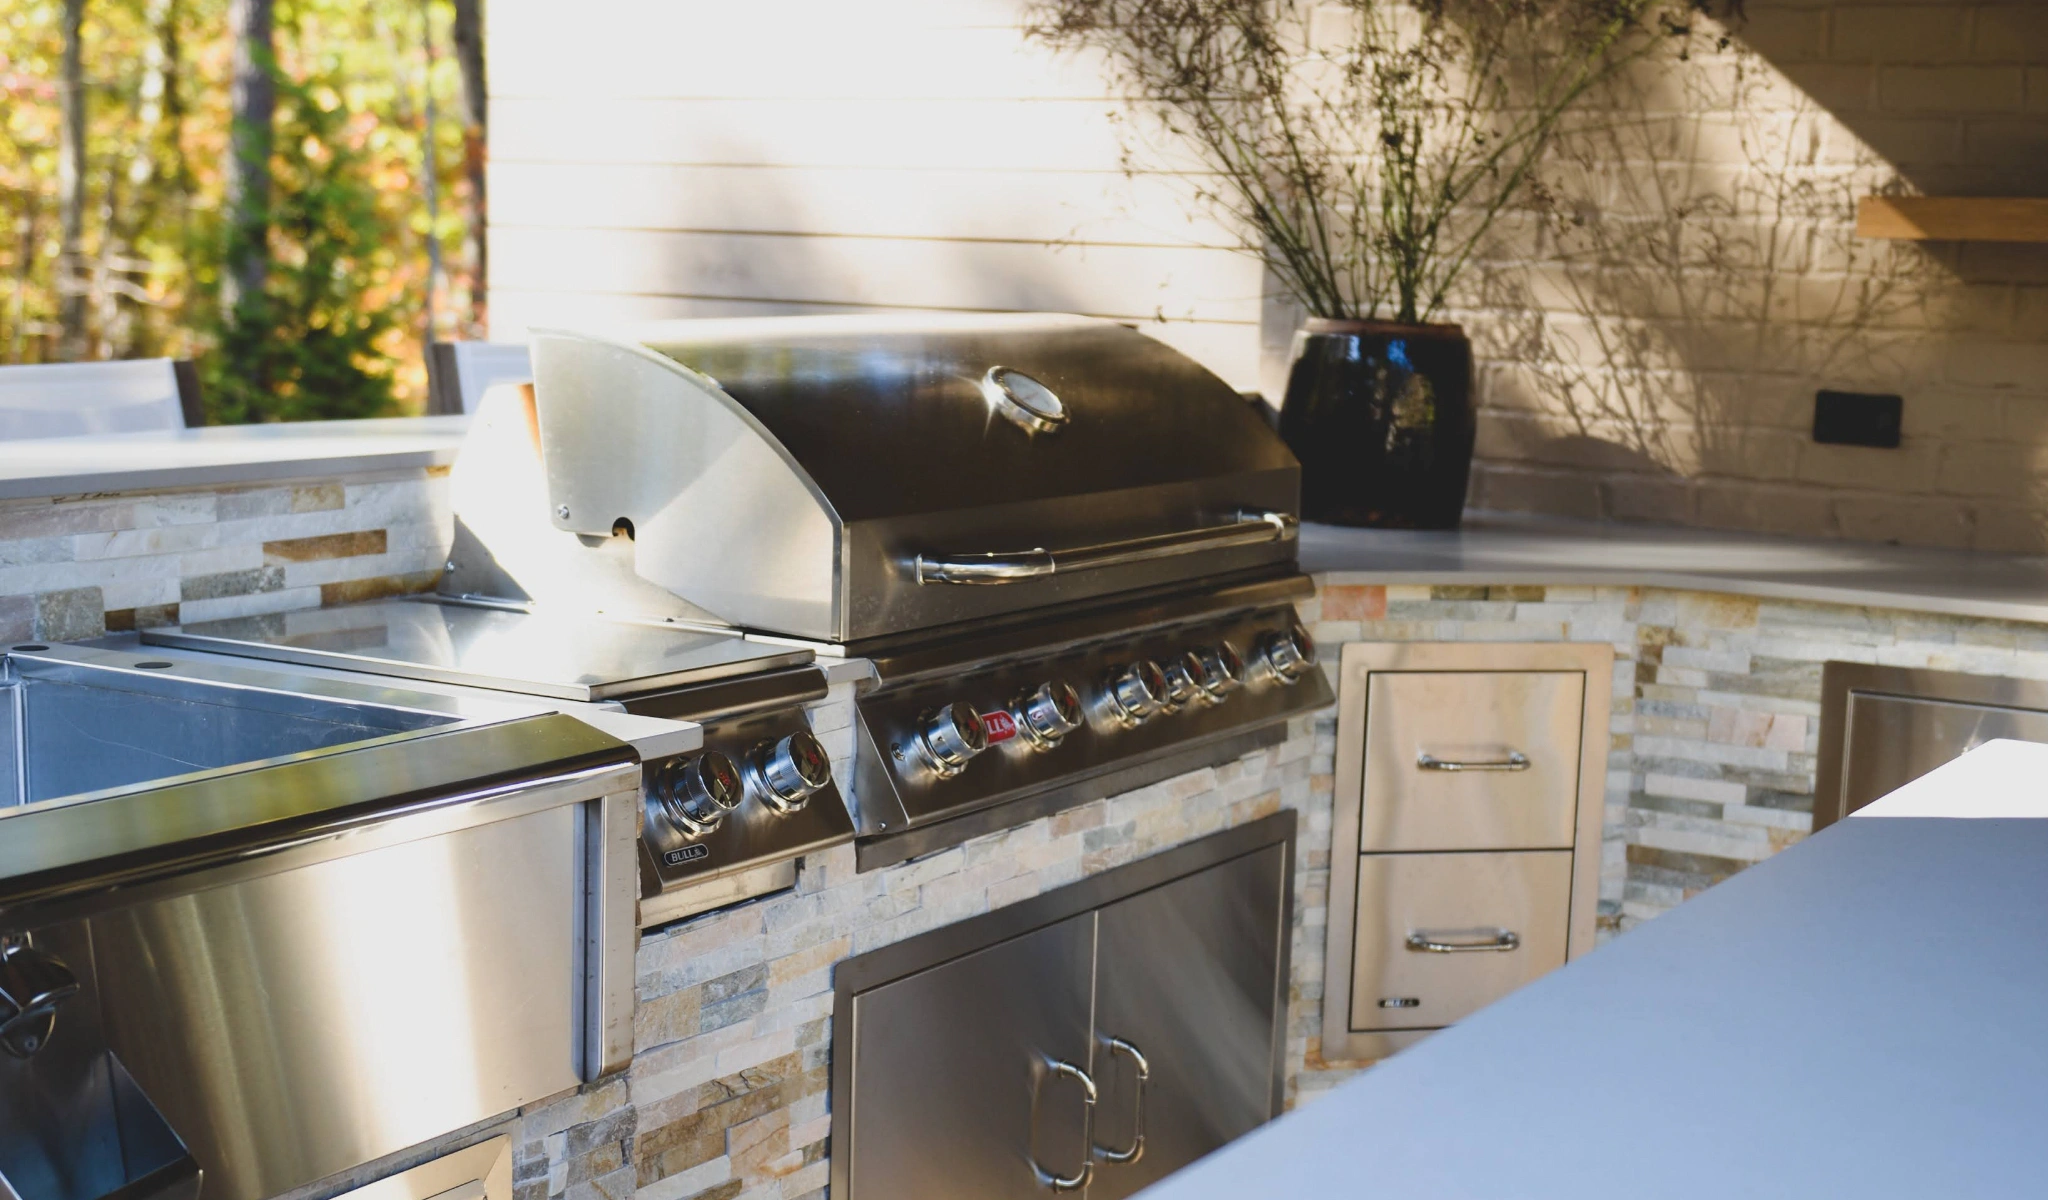 An outdoor kitchen with stainless steel appliances and stone details.